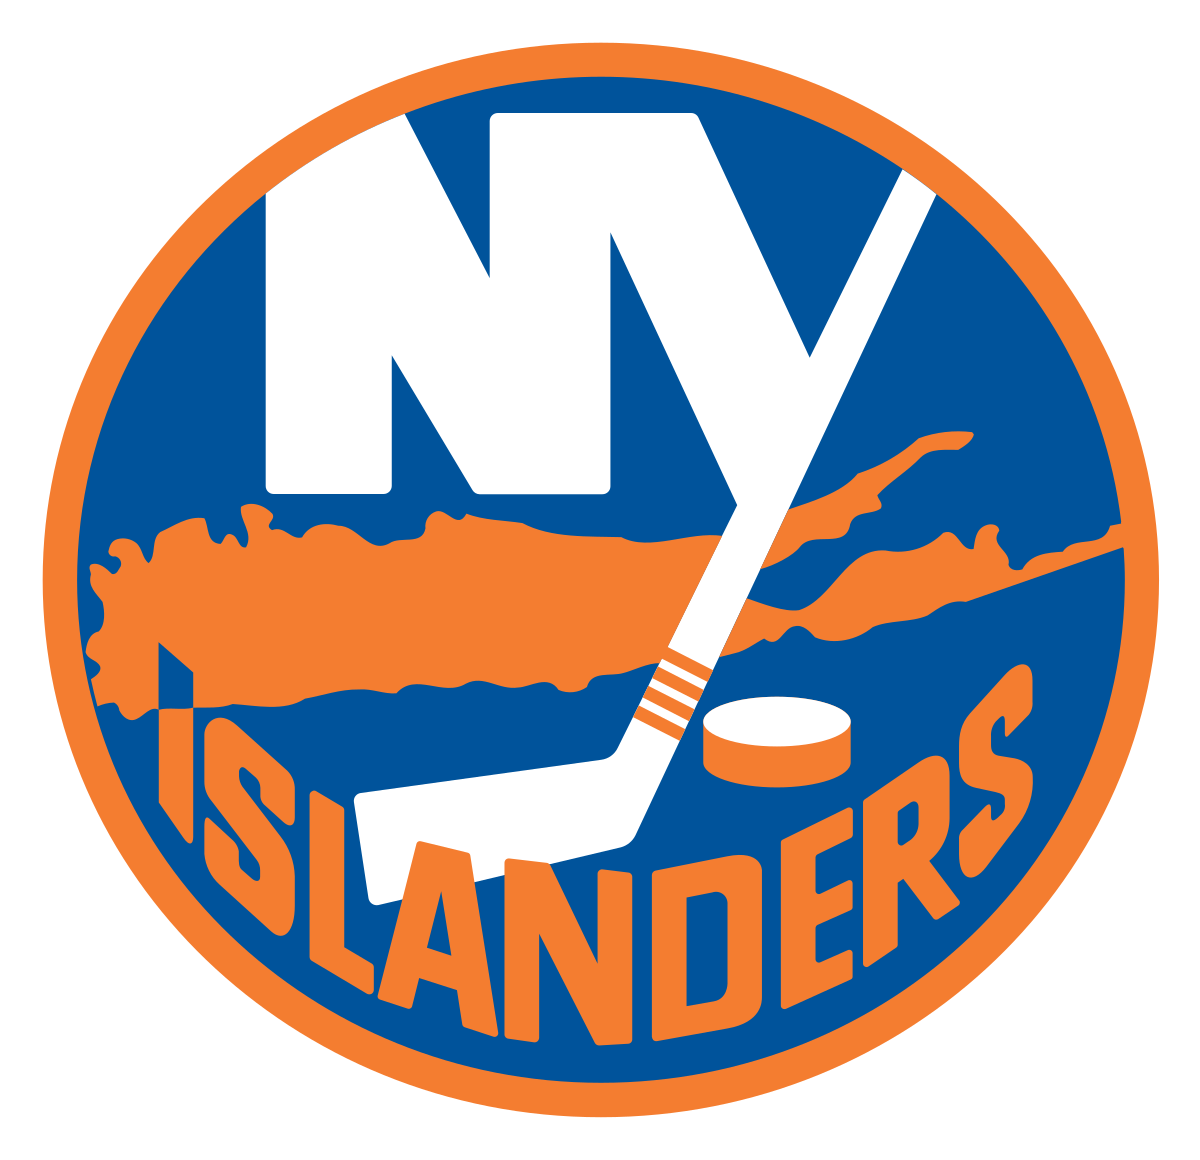 Beauvillier's OT goal lifts Islanders over Sabres